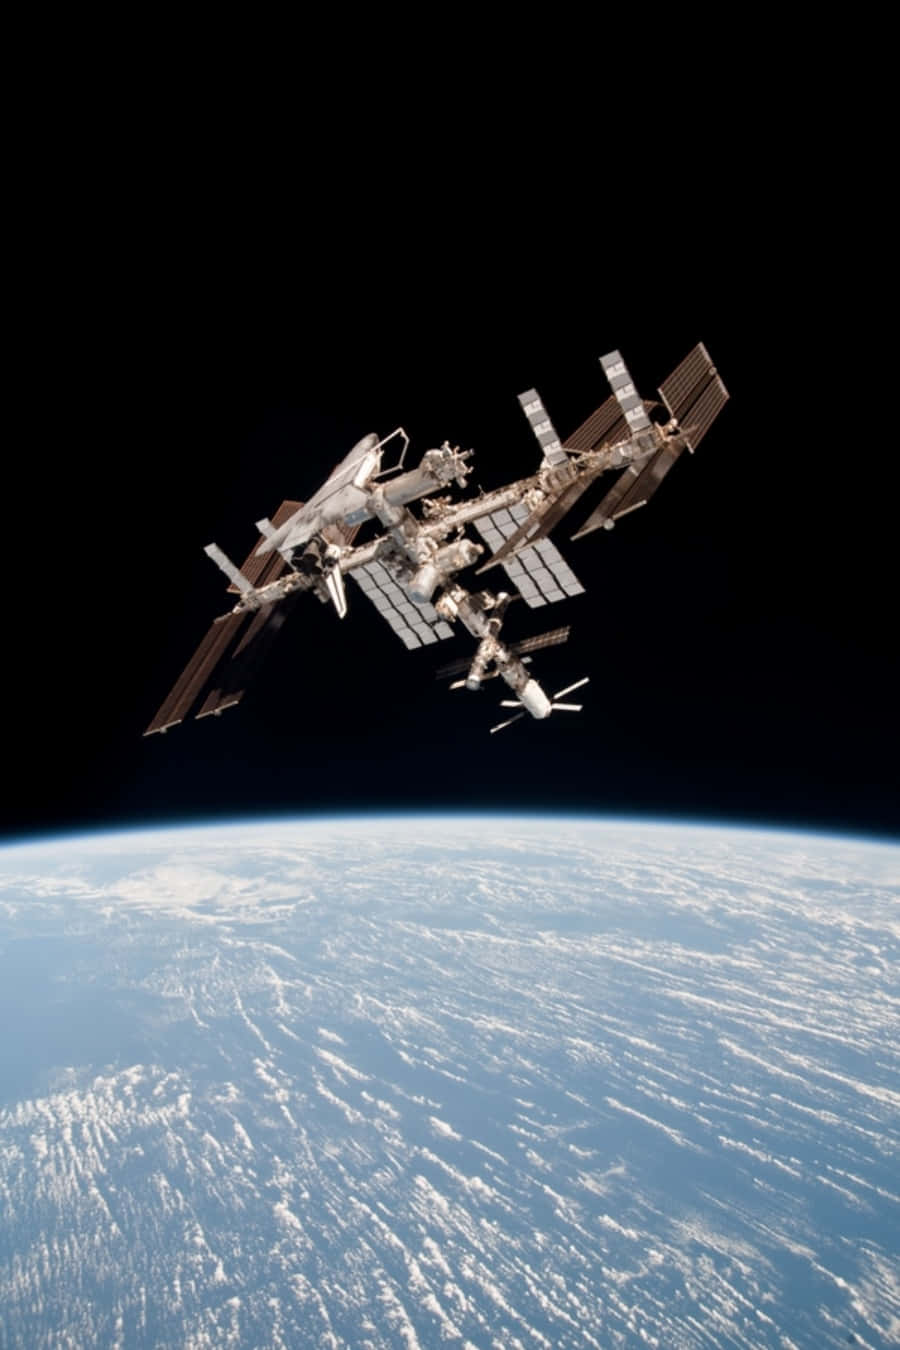 Stunning view of the International Space Station (ISS) in Earth's orbit Wallpaper